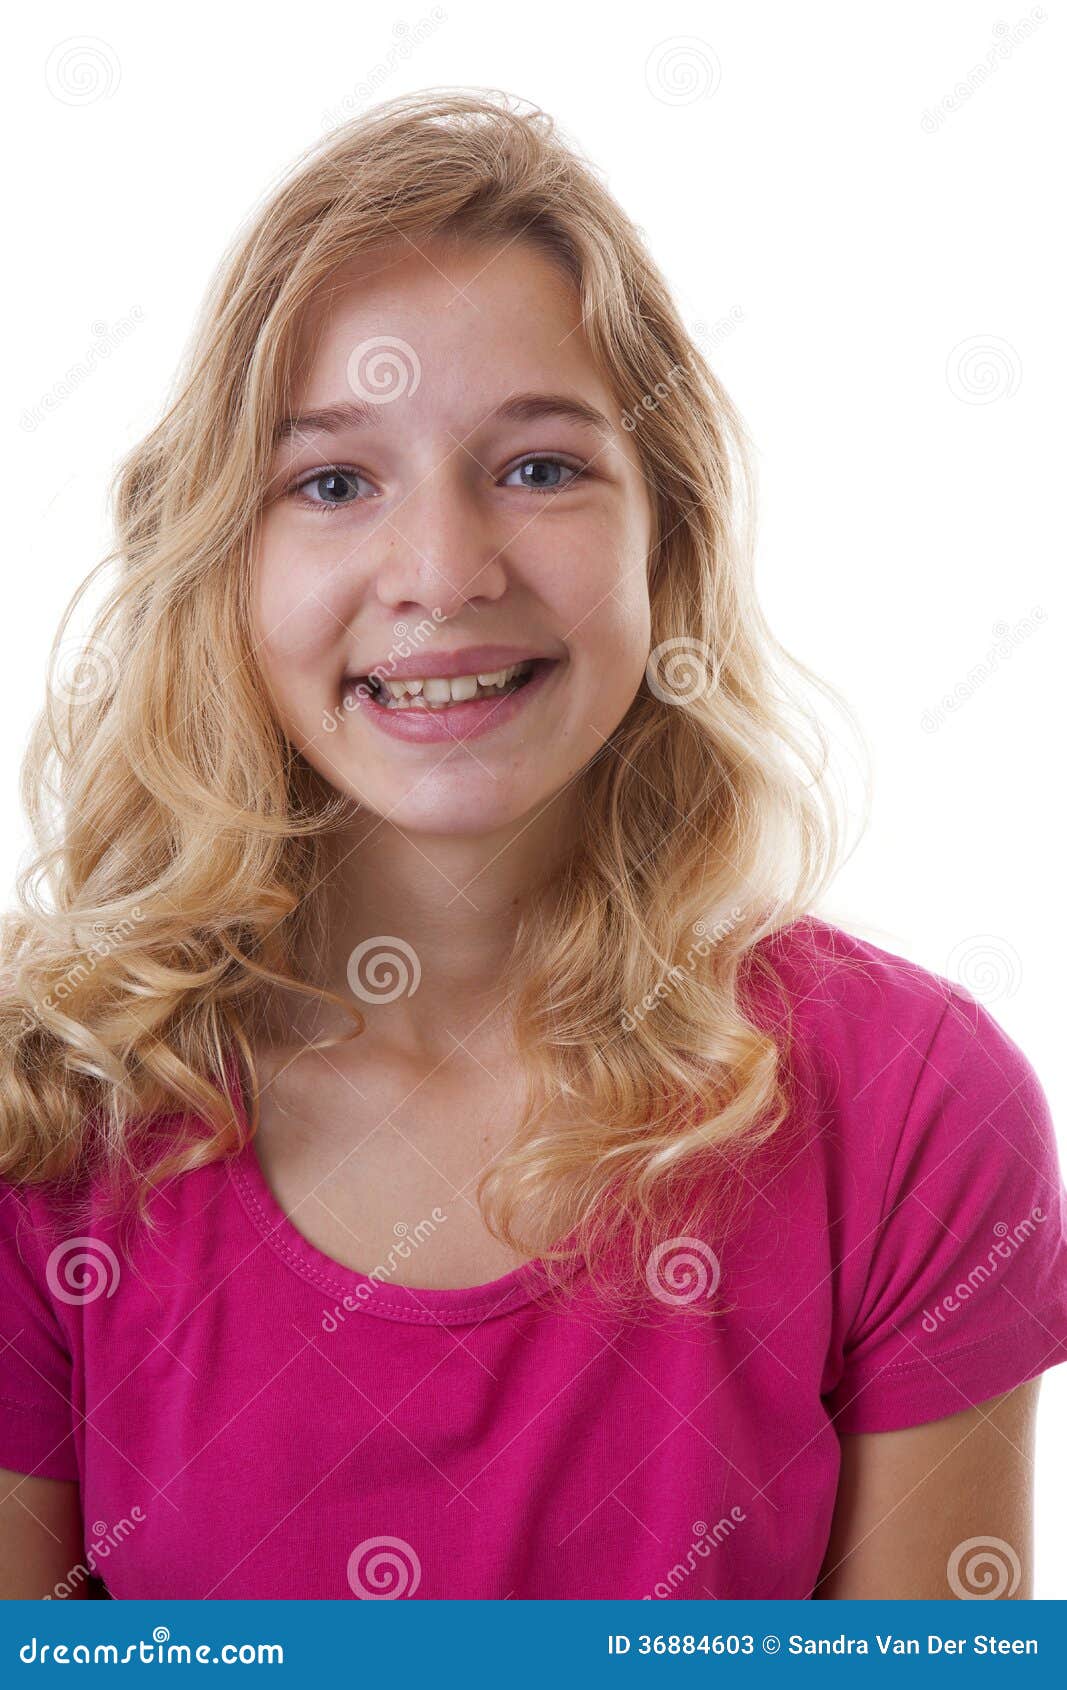 Teenager Is Smiling Into Camera Stock Image - Image of girl, smiling ...